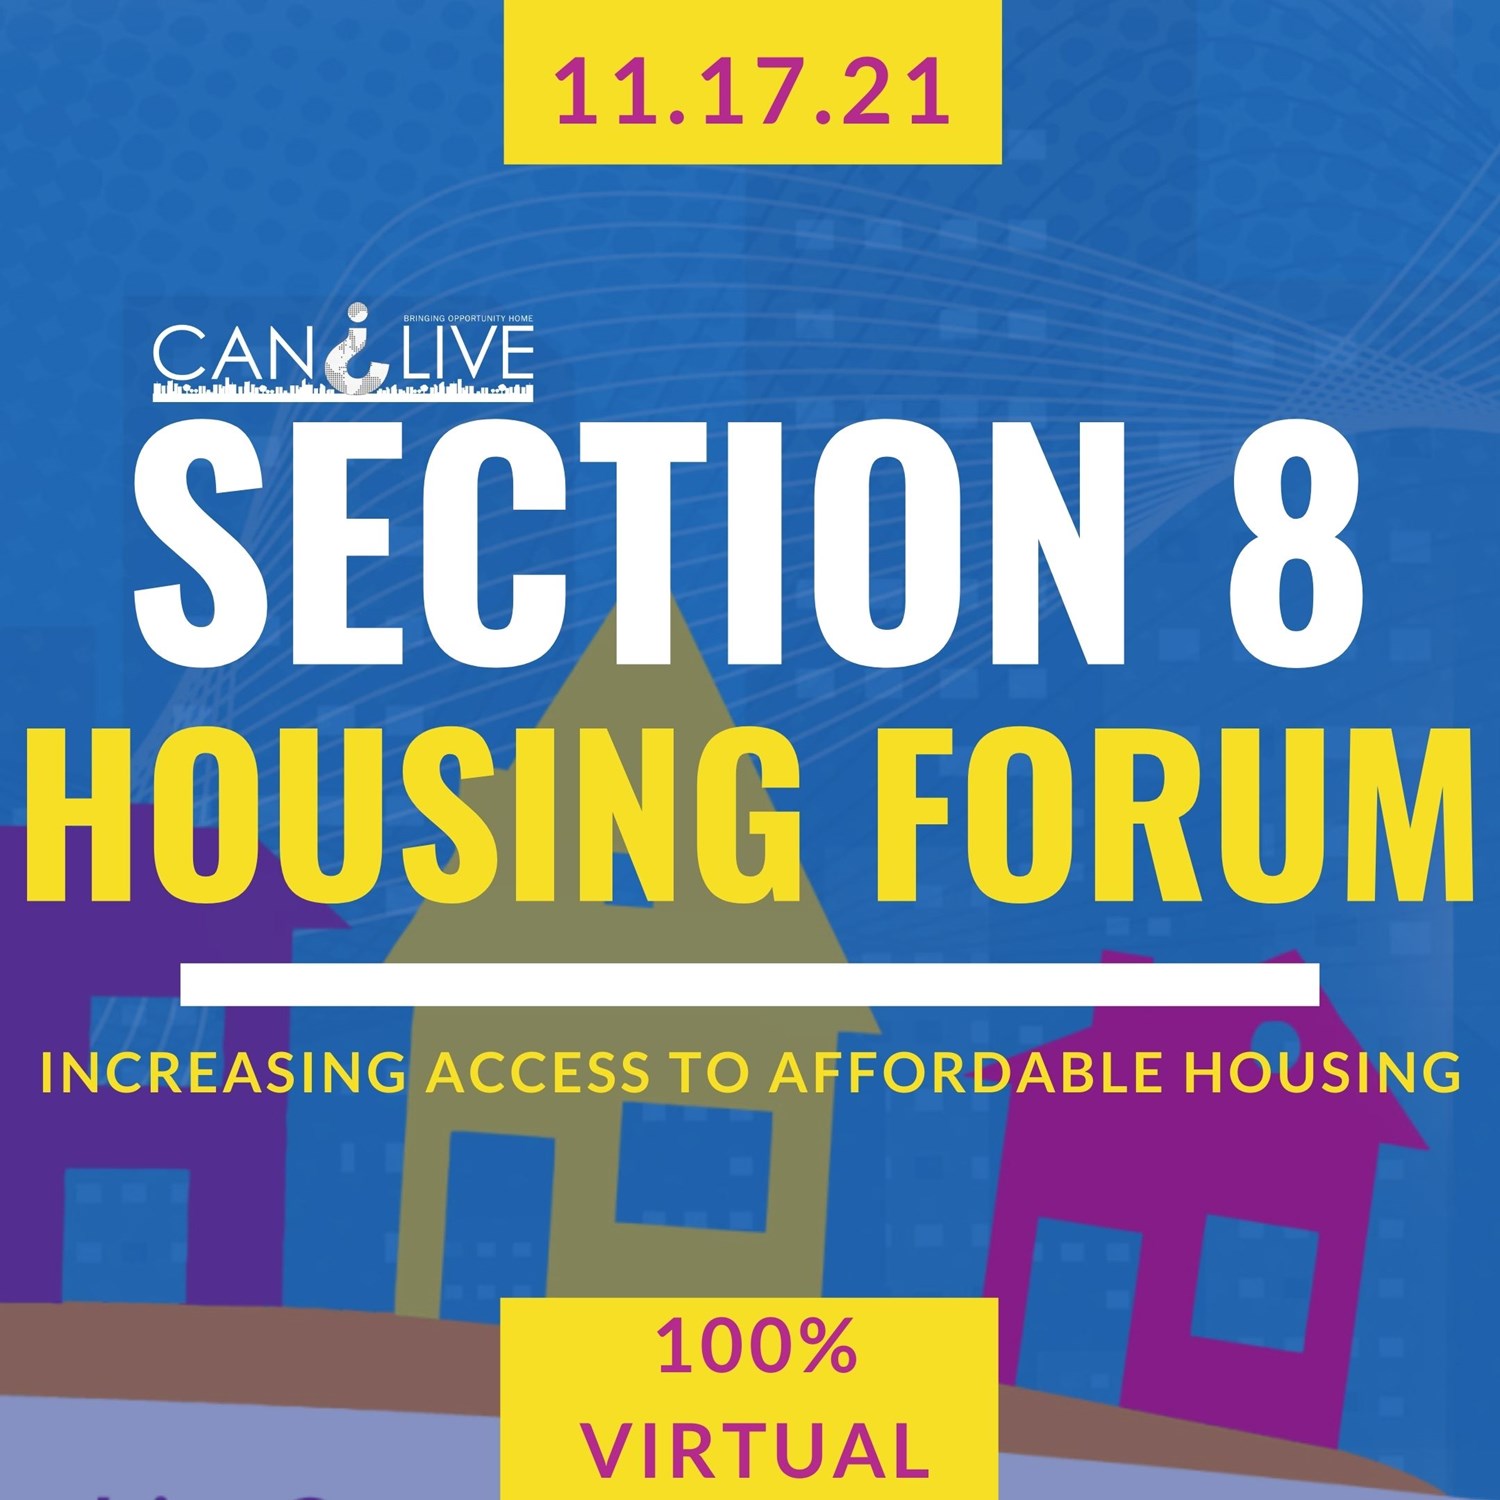 Section 8 Housing Forum